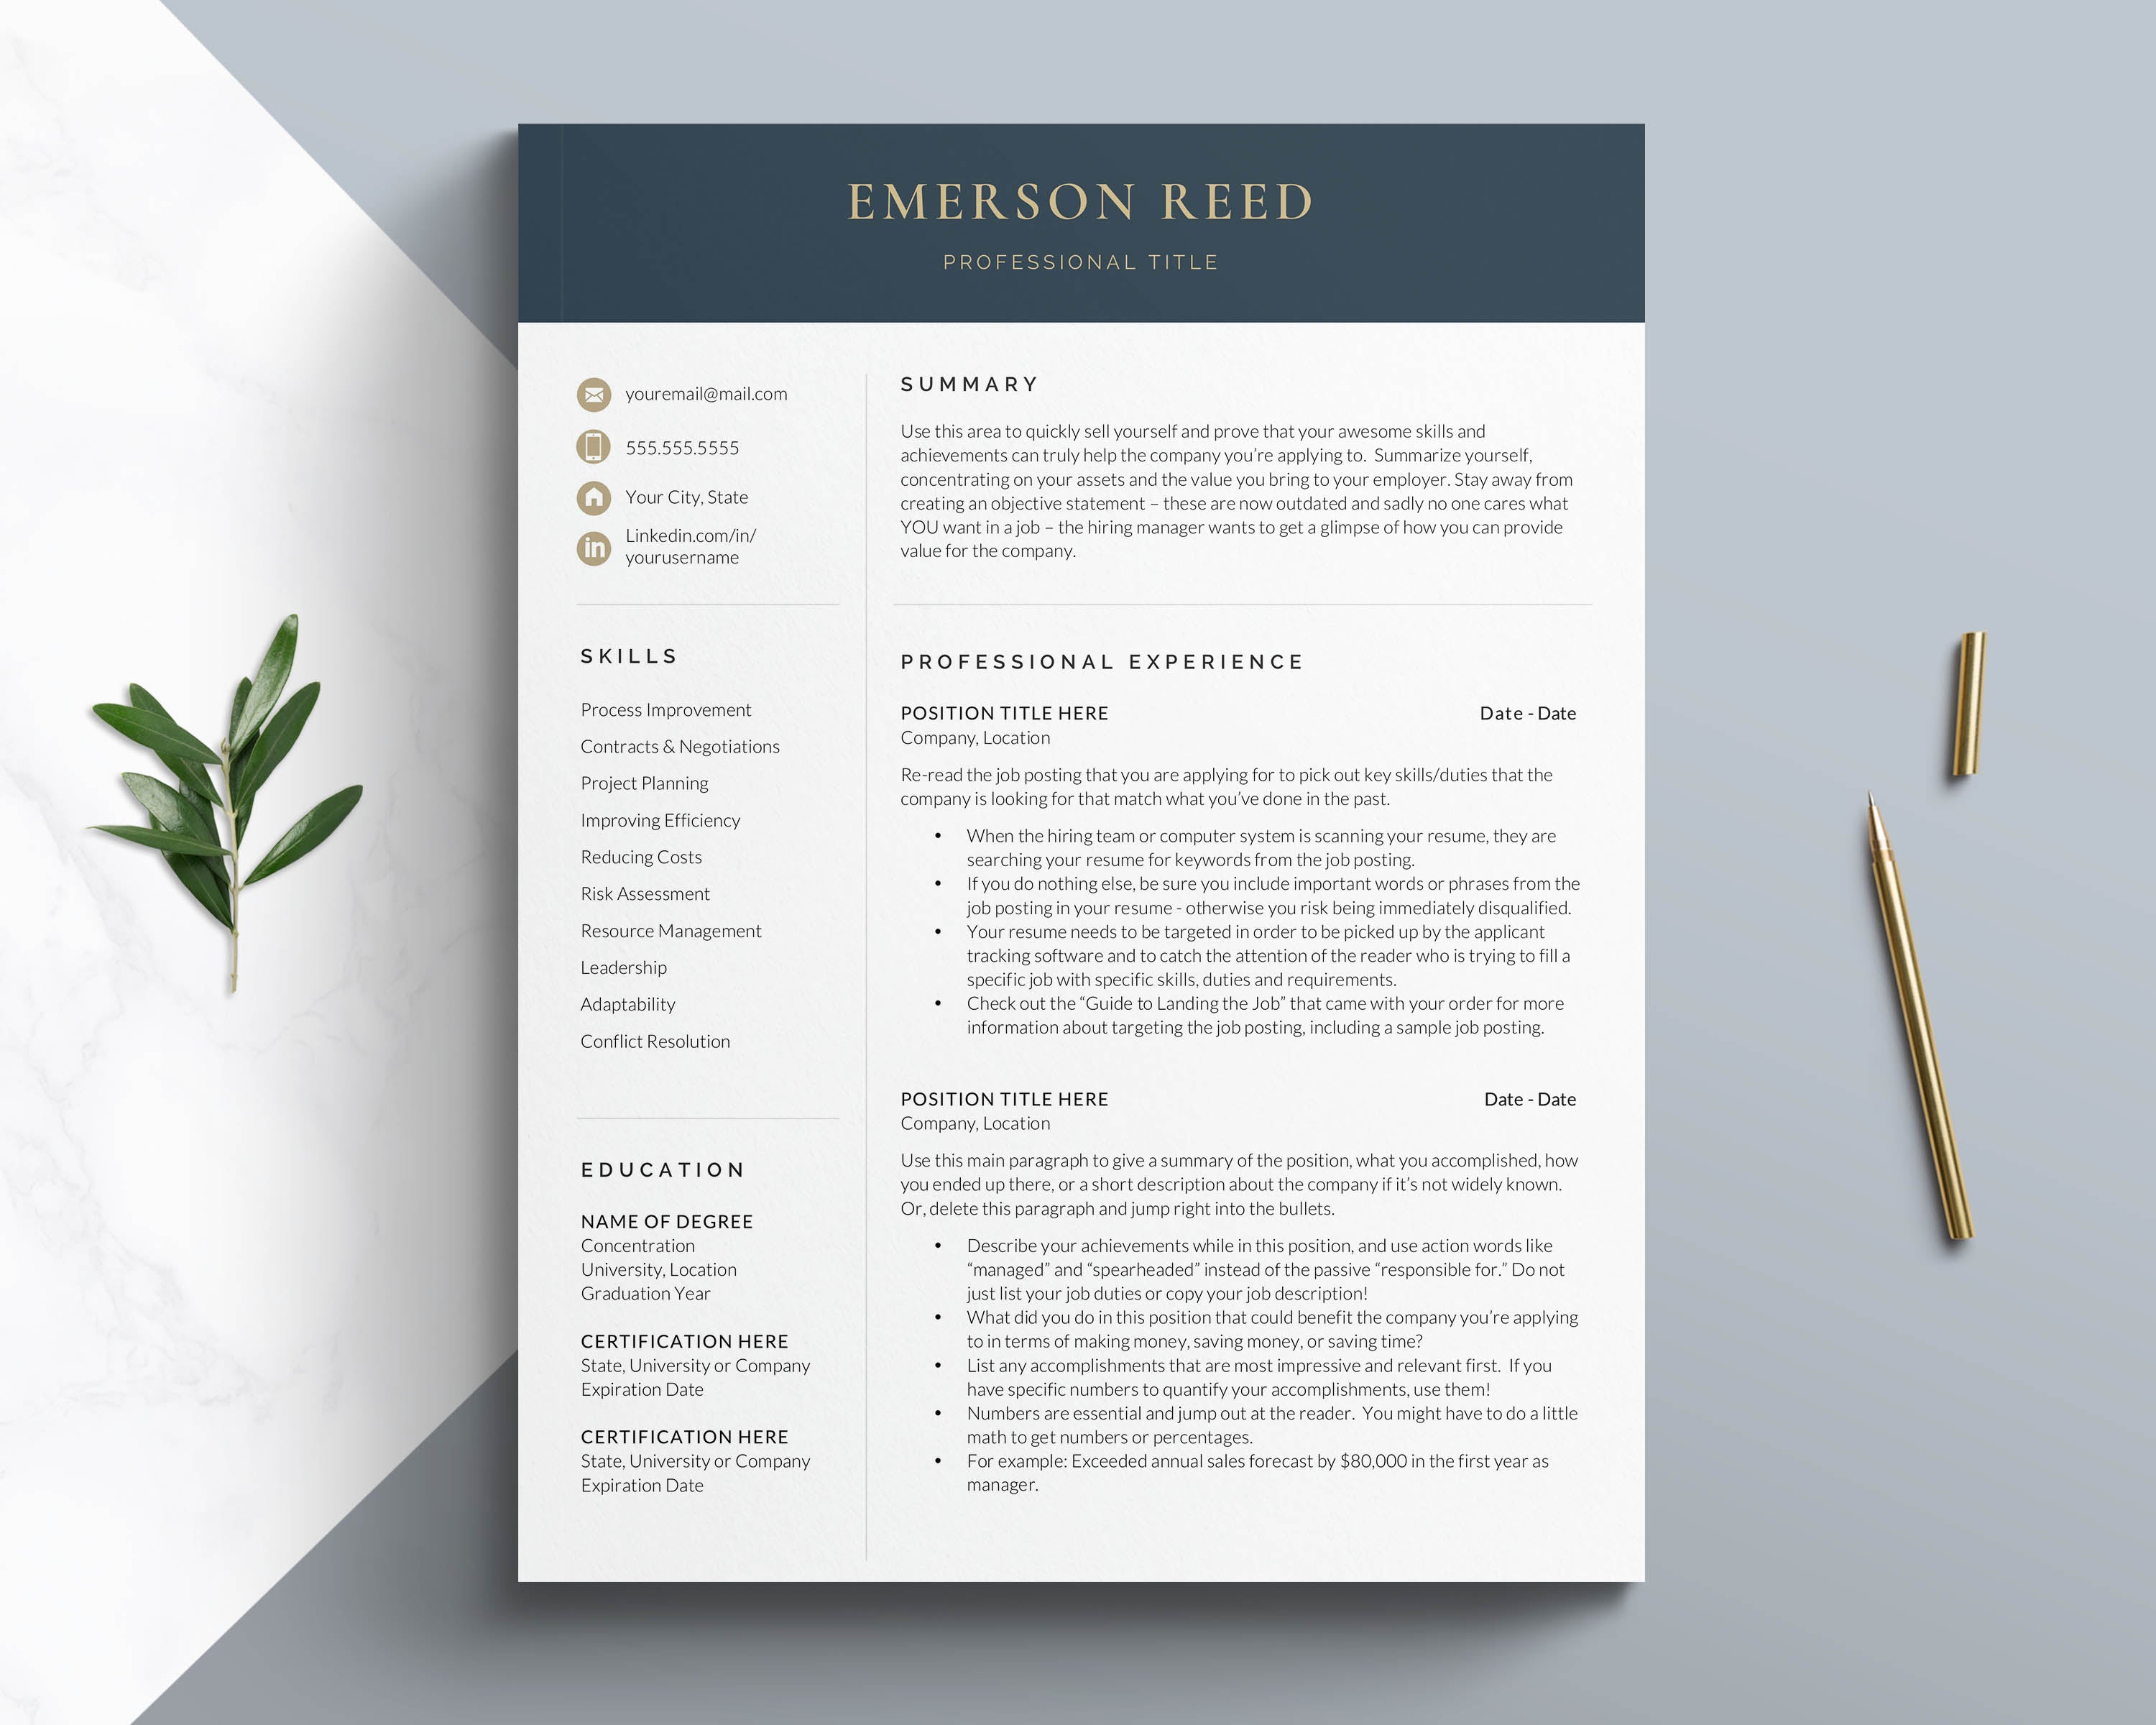 Corporate Finance resume template for word, google docs and apple pages